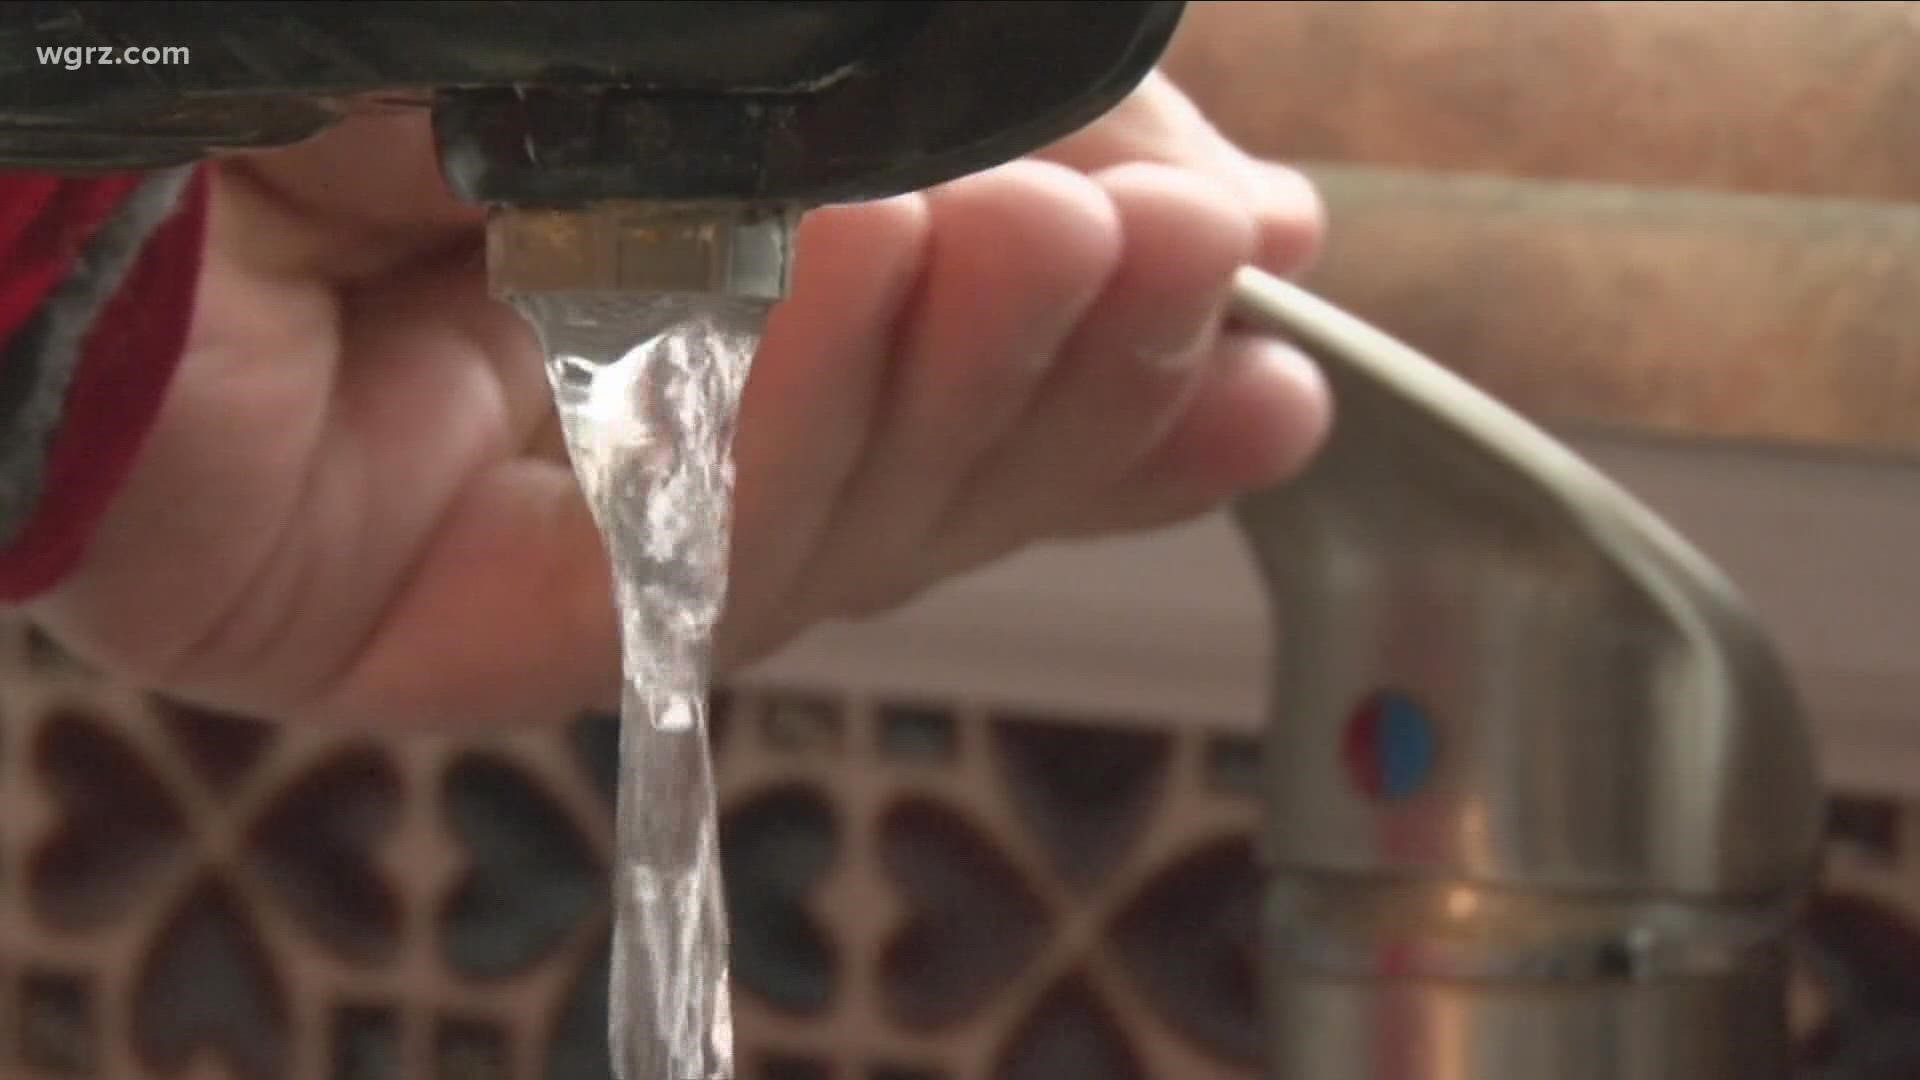 of fredonia residents know that despite some taste and odor issues with their water... it is safe to drink.